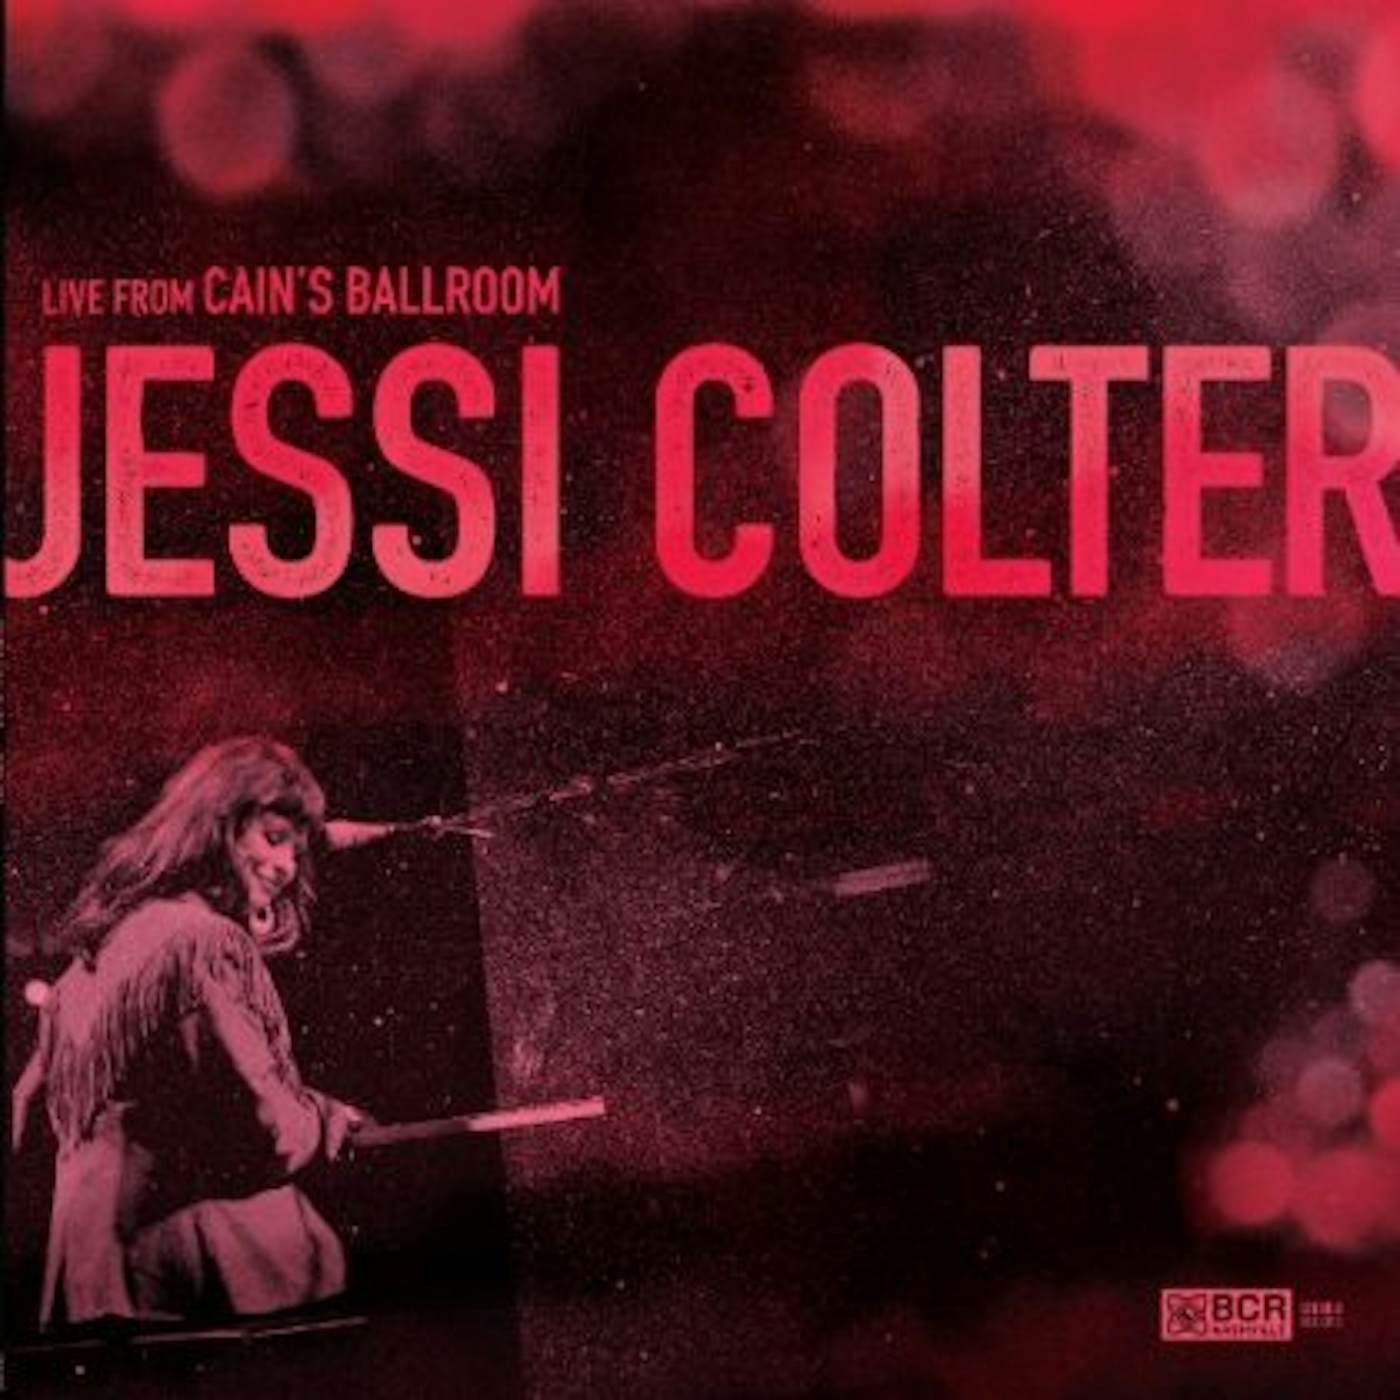 Jessi Colter LIVE FROM CAINS CD